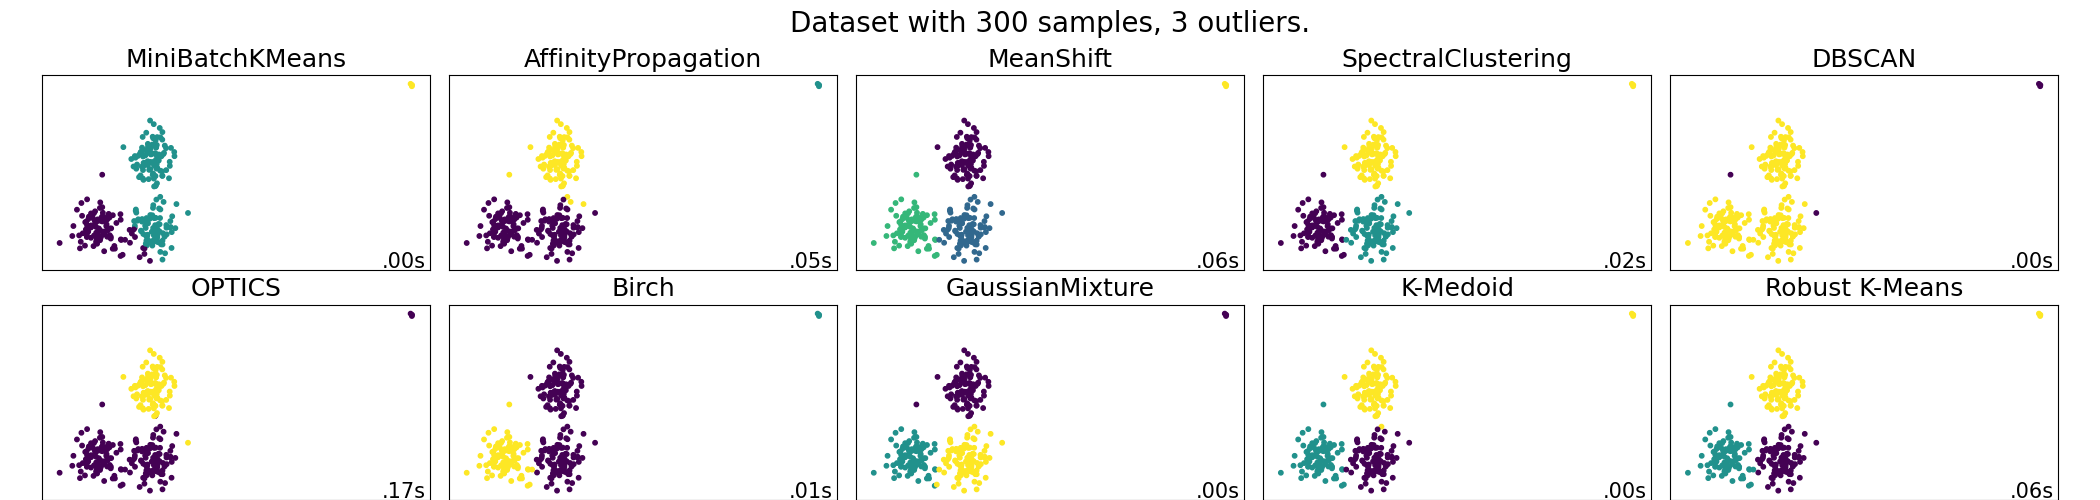 Dataset with 300 samples, 3 outliers., MiniBatchKMeans, AffinityPropagation, MeanShift, SpectralClustering, DBSCAN, OPTICS, Birch, GaussianMixture, K-Medoid, Robust K-Means